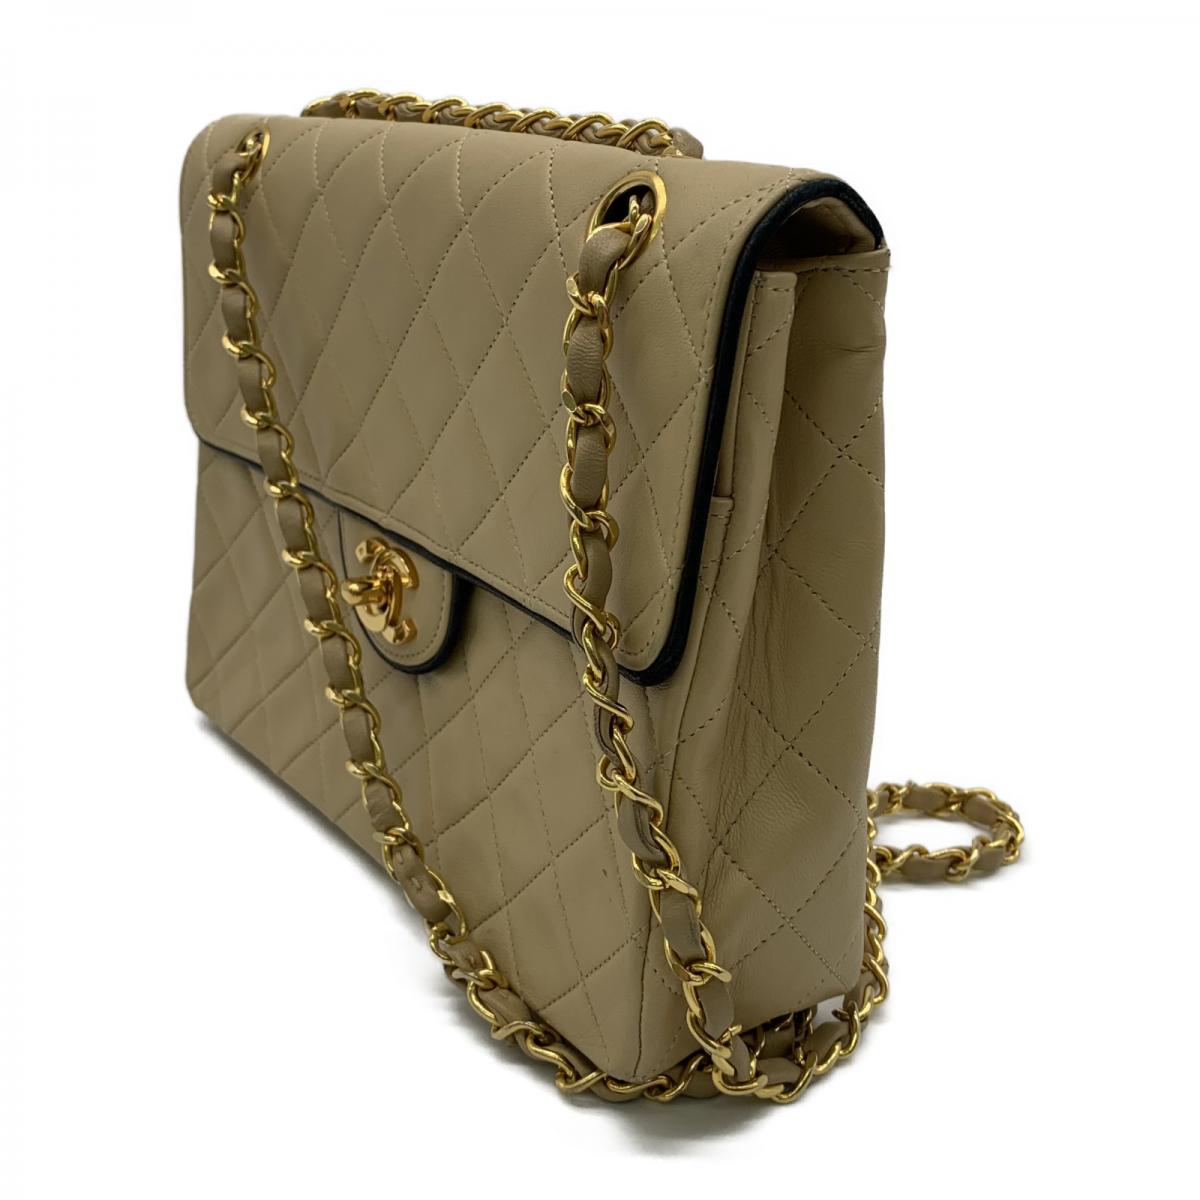 CC Quilted Leather Single Flap Bag